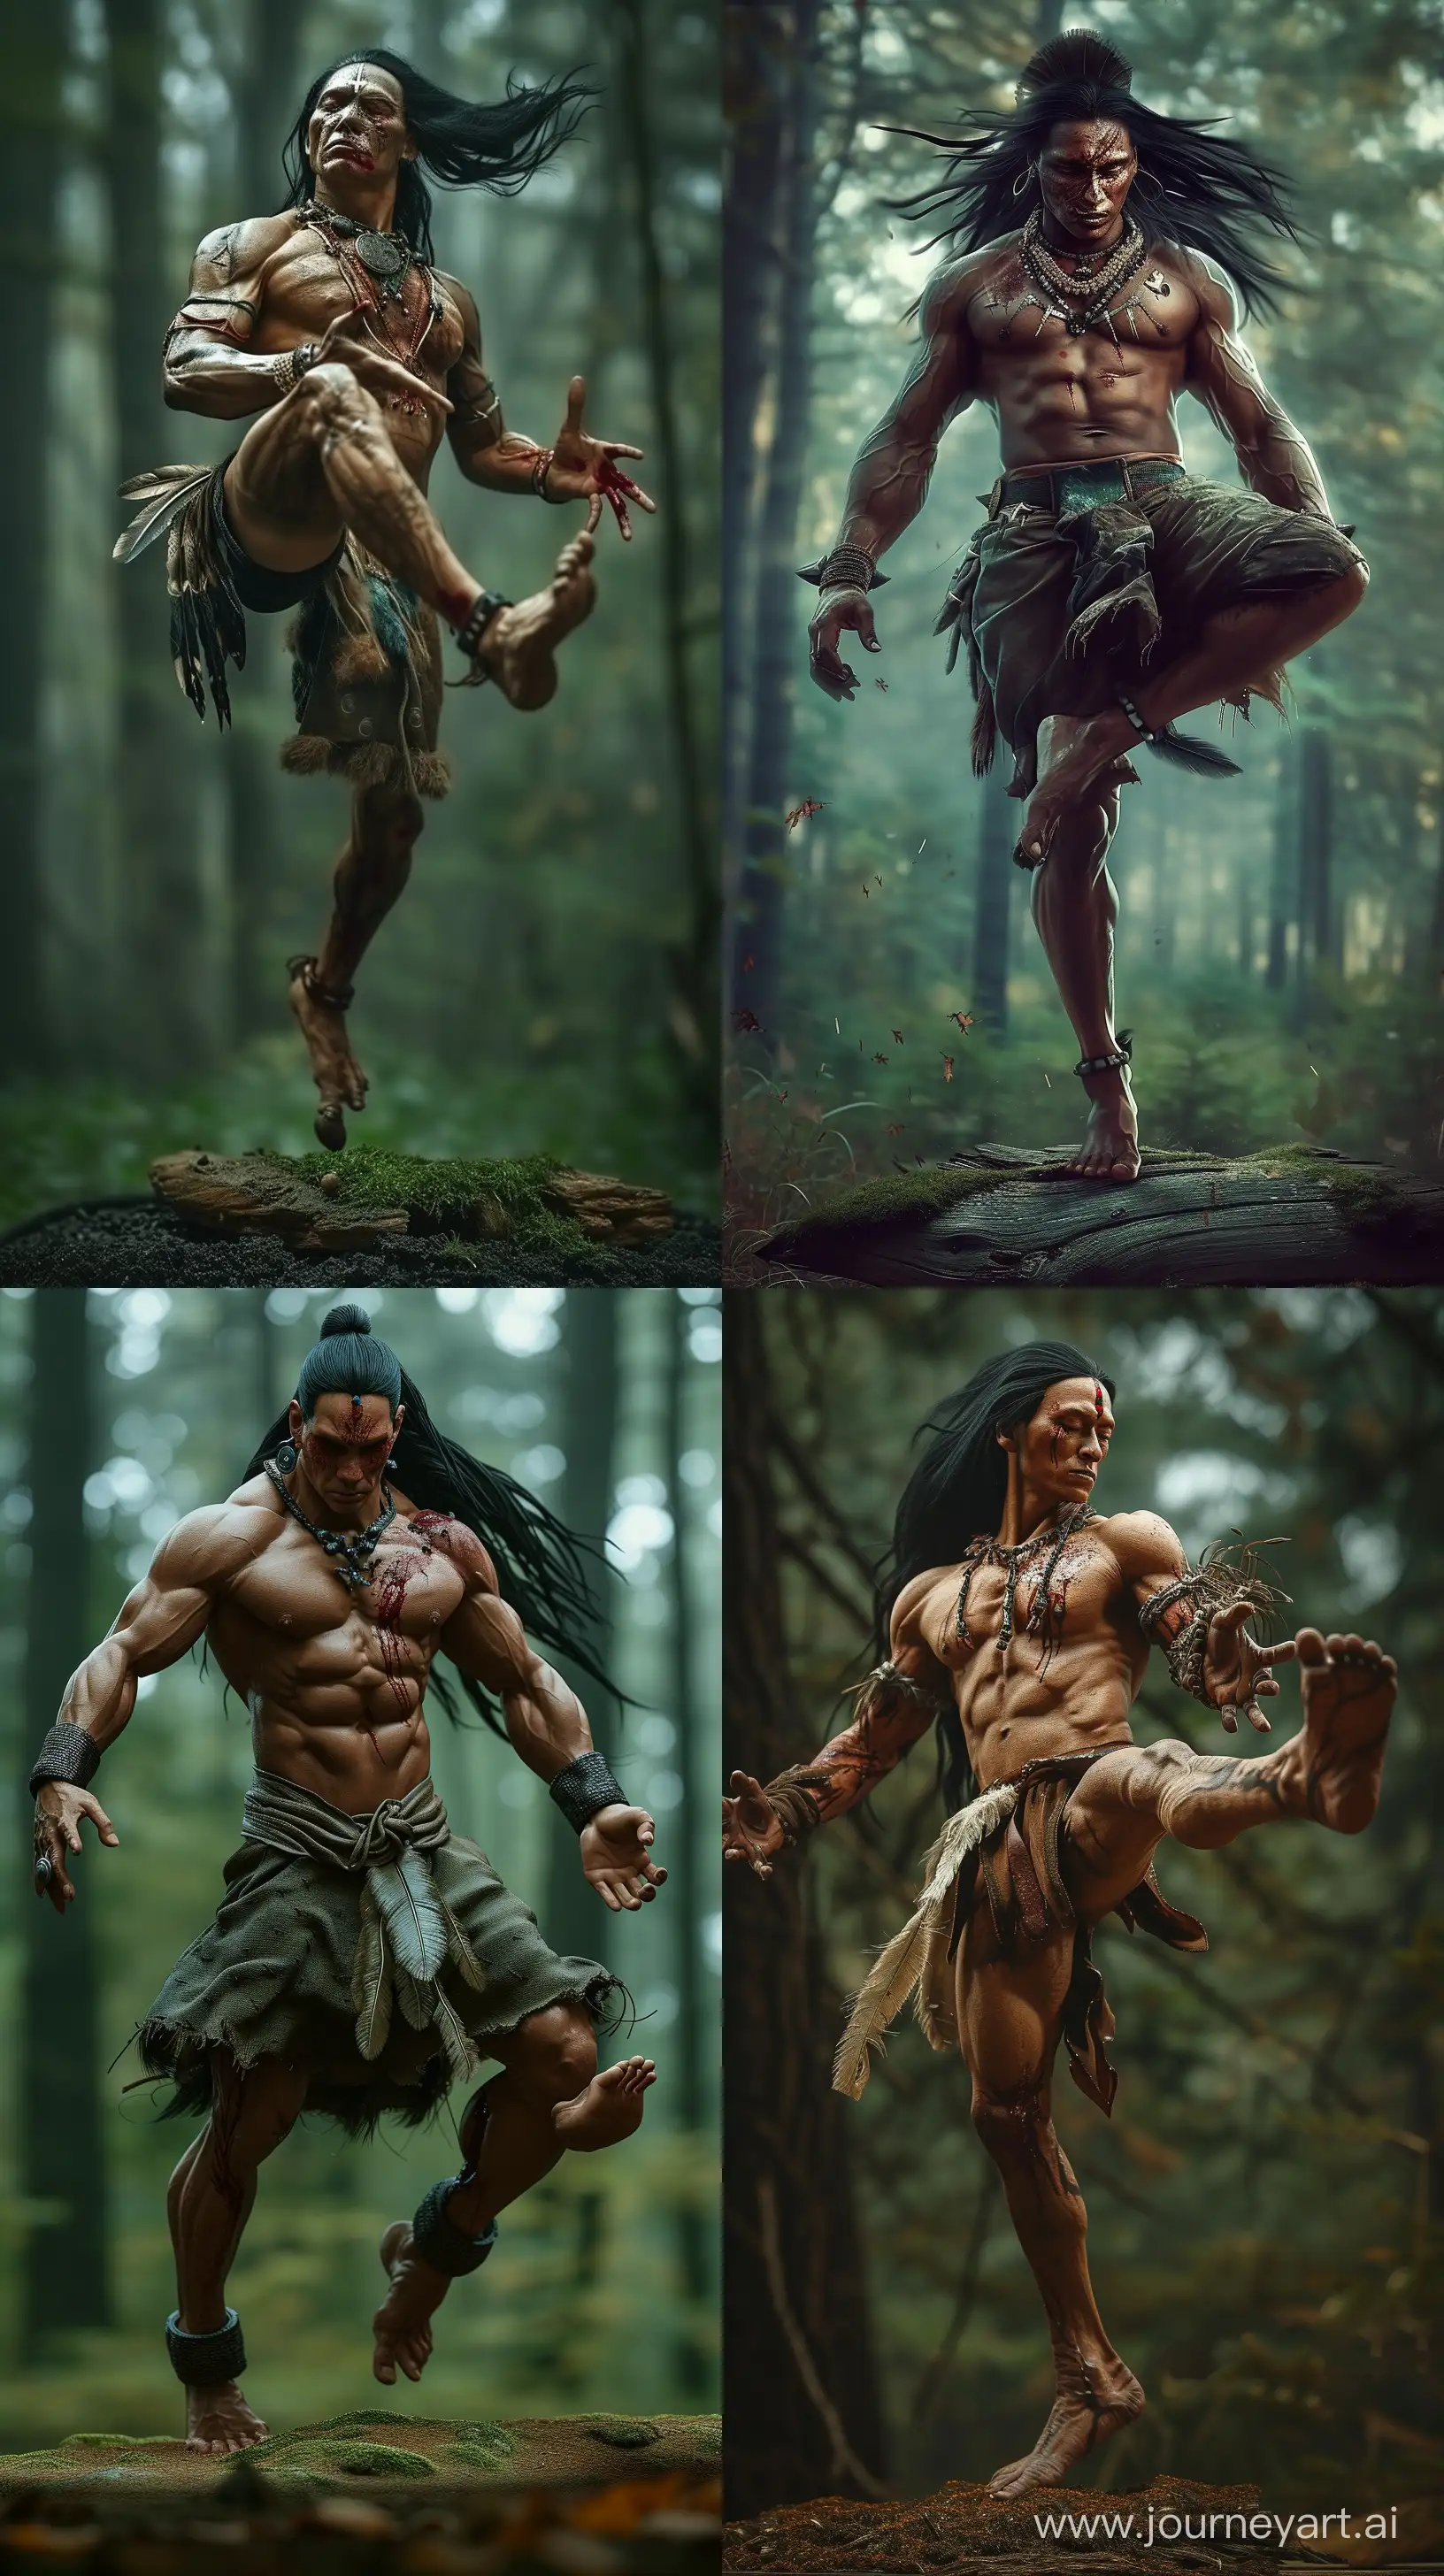 Realistic images depicting a muscular Indian hunter, black haired, standing on one foot and floating his other foot in the air, his one eye is closed and bleeding, intricate details, forest scenery, UHD --ar 9:16